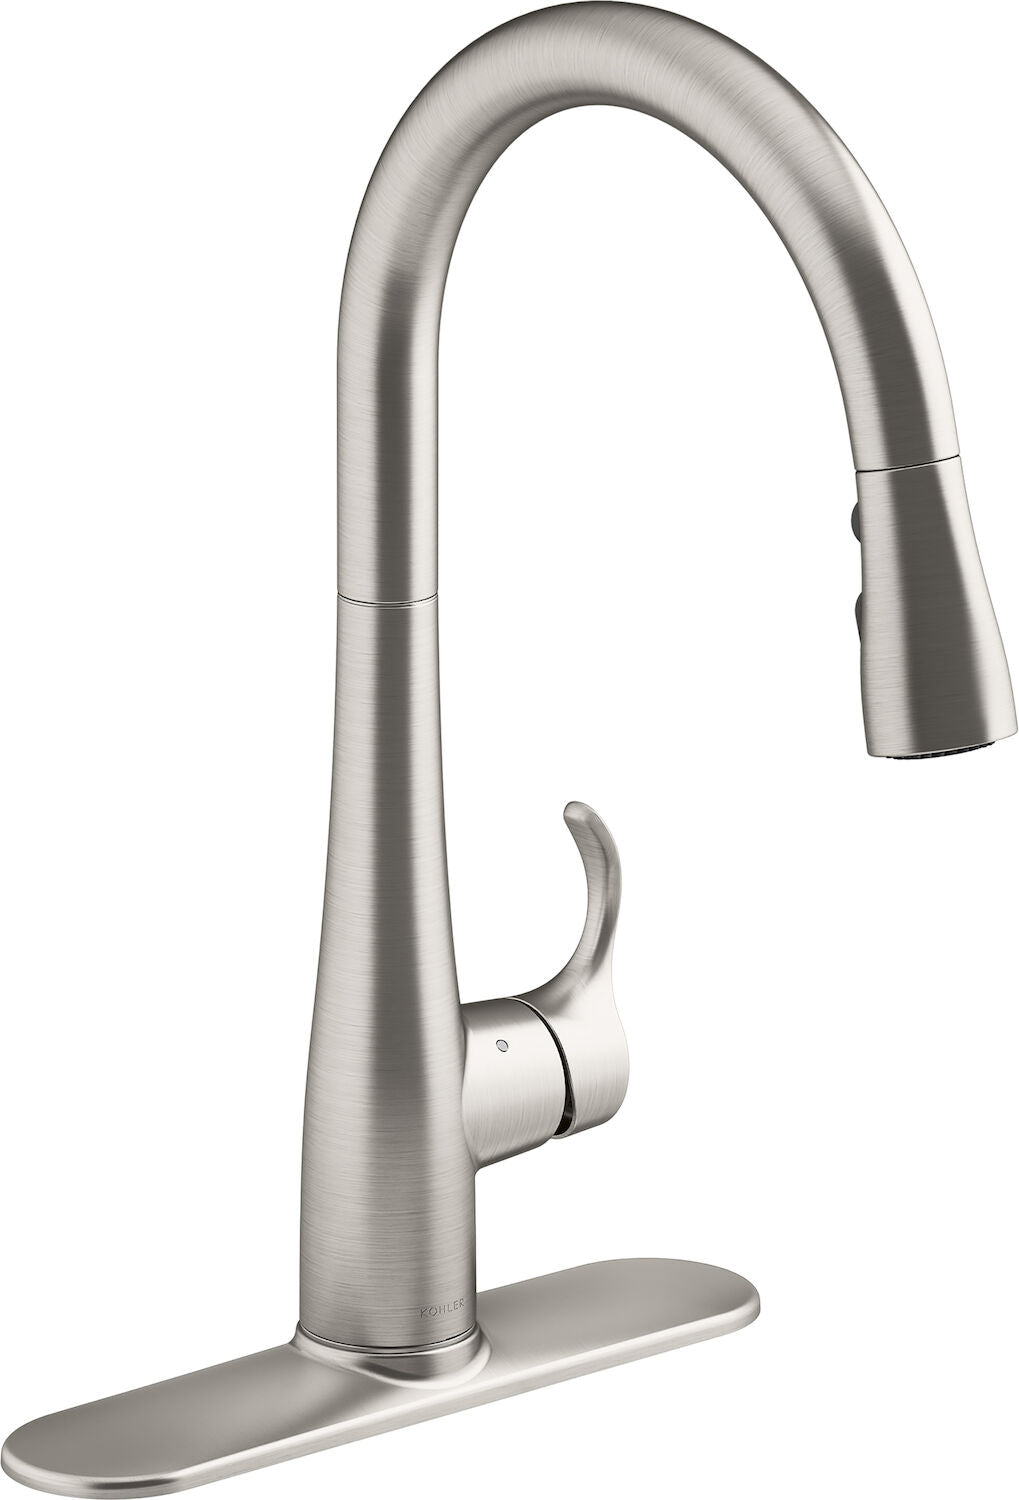 SIMPLICE® TOUCHLESS PULL-DOWN KITCHEN SINK FAUCET